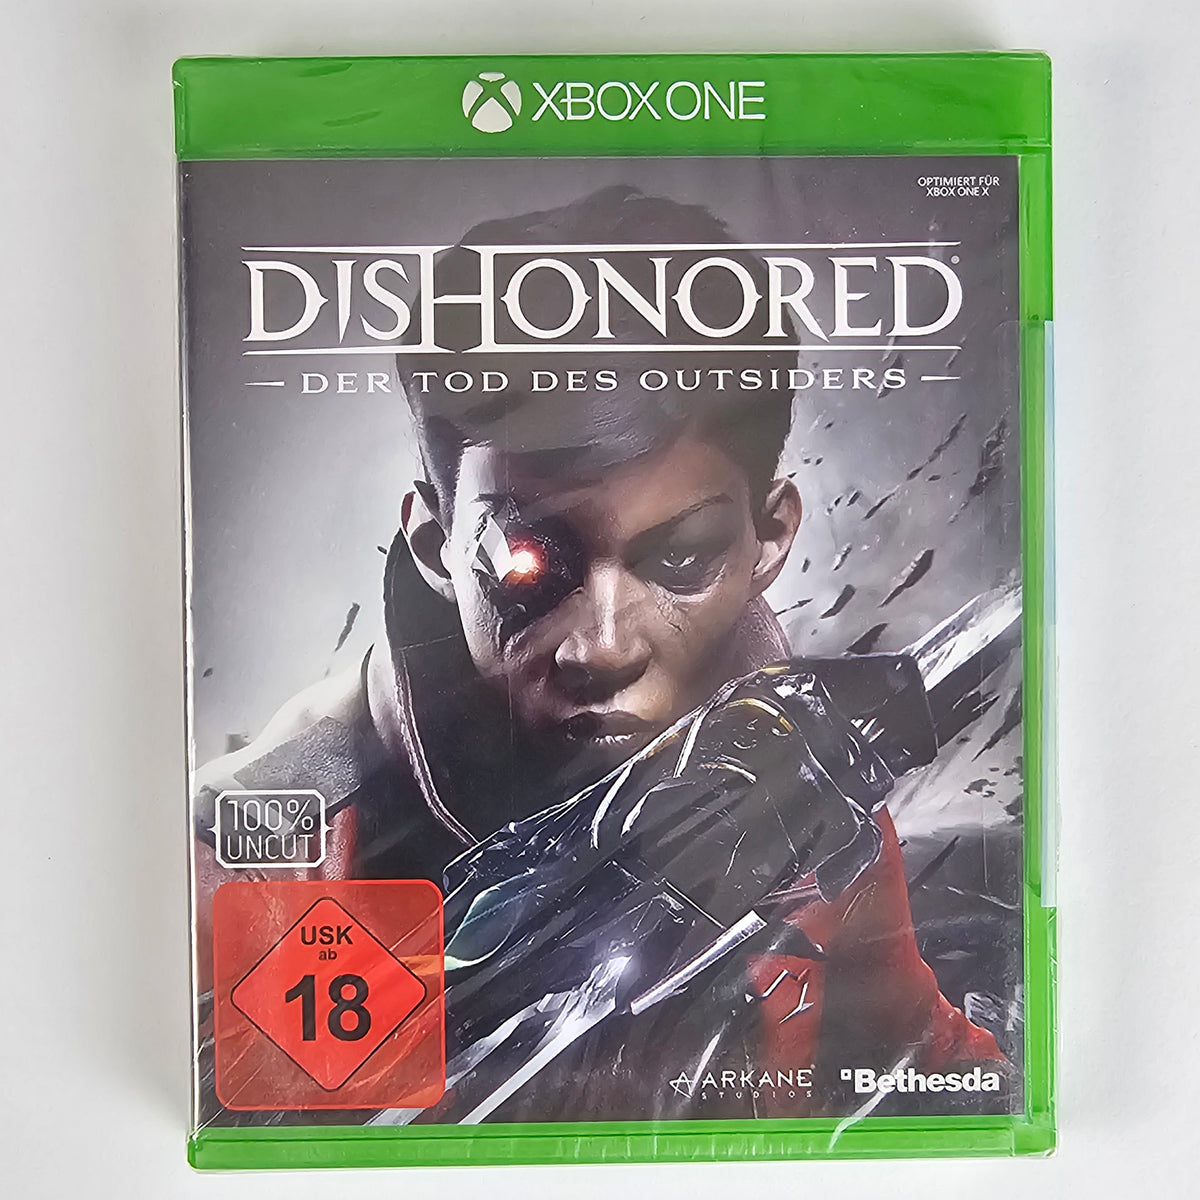 Dishonored Der Tod des Outsiders [XBOXO